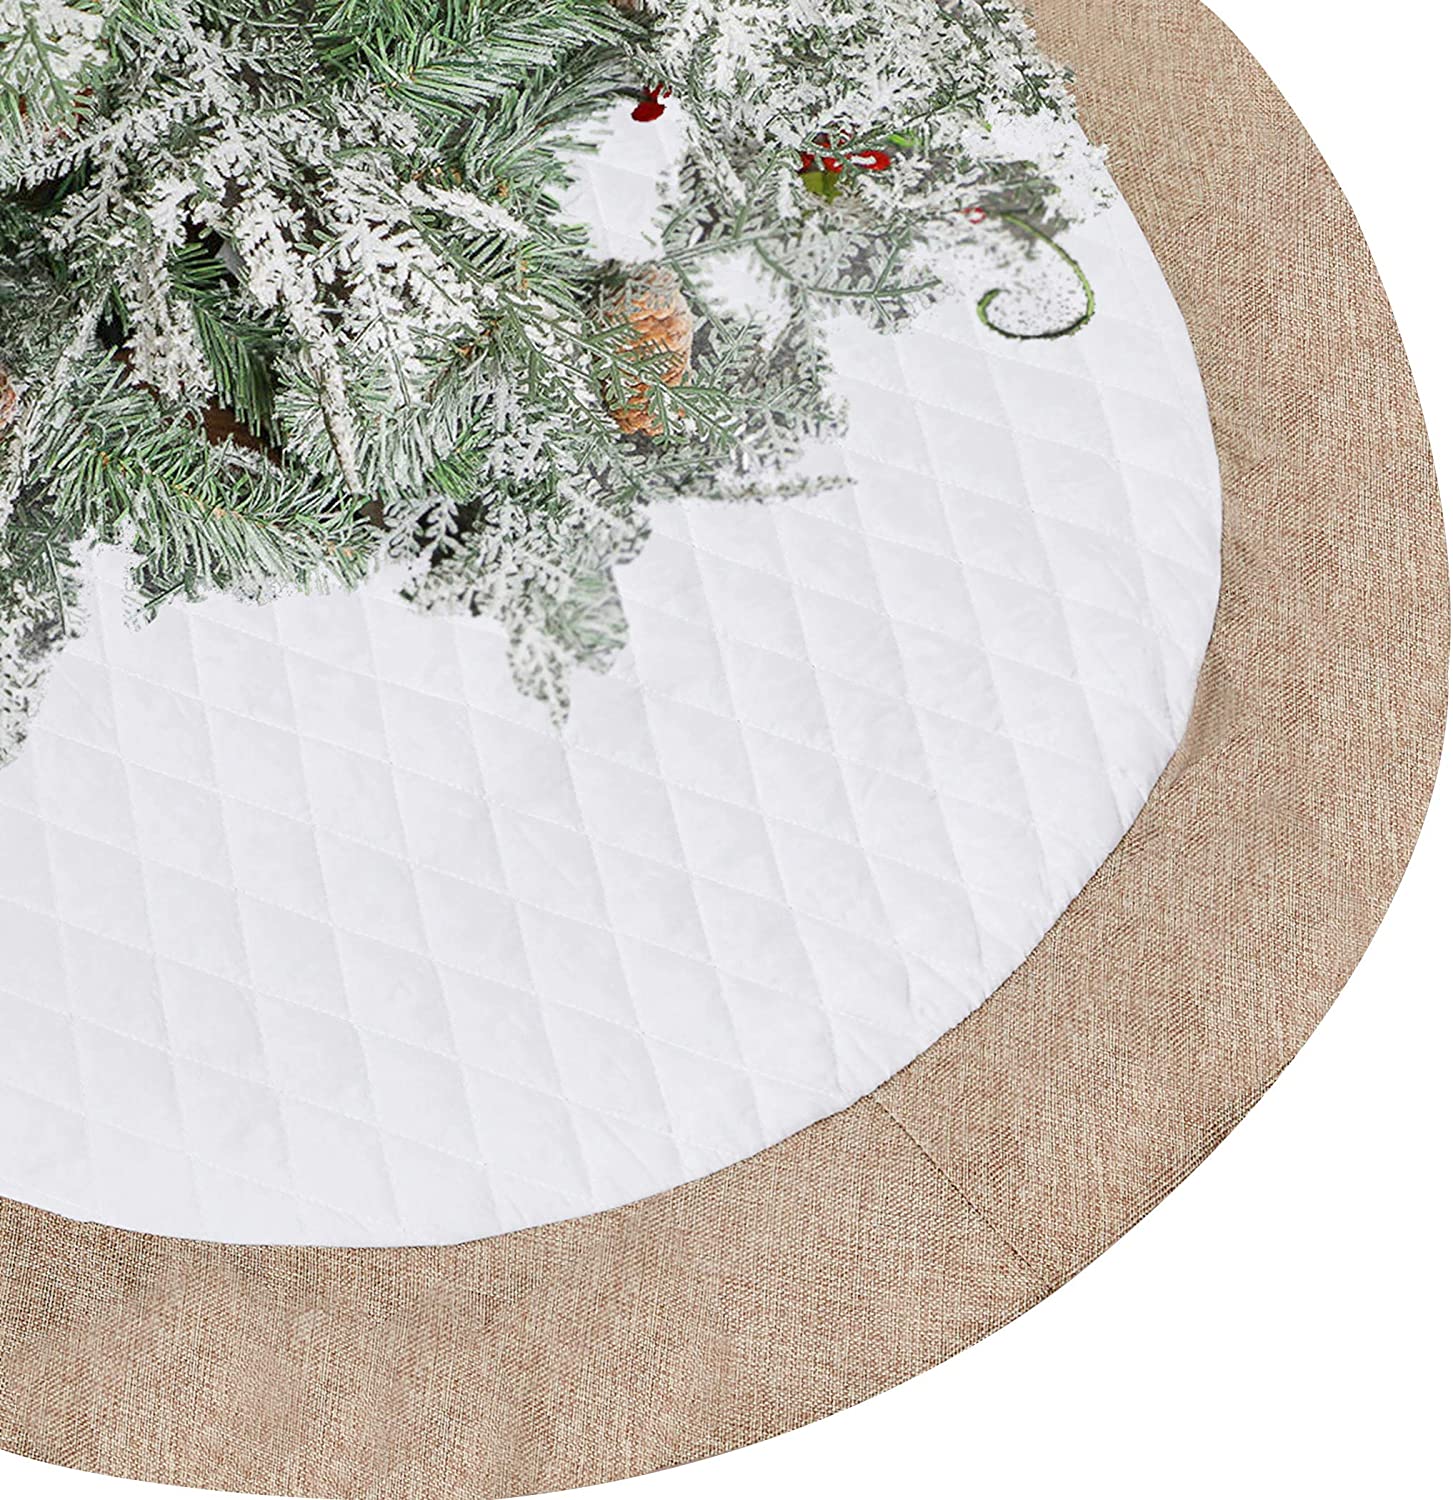 Lalent White Quilted Christmas Tree Skirt, 48-Inch